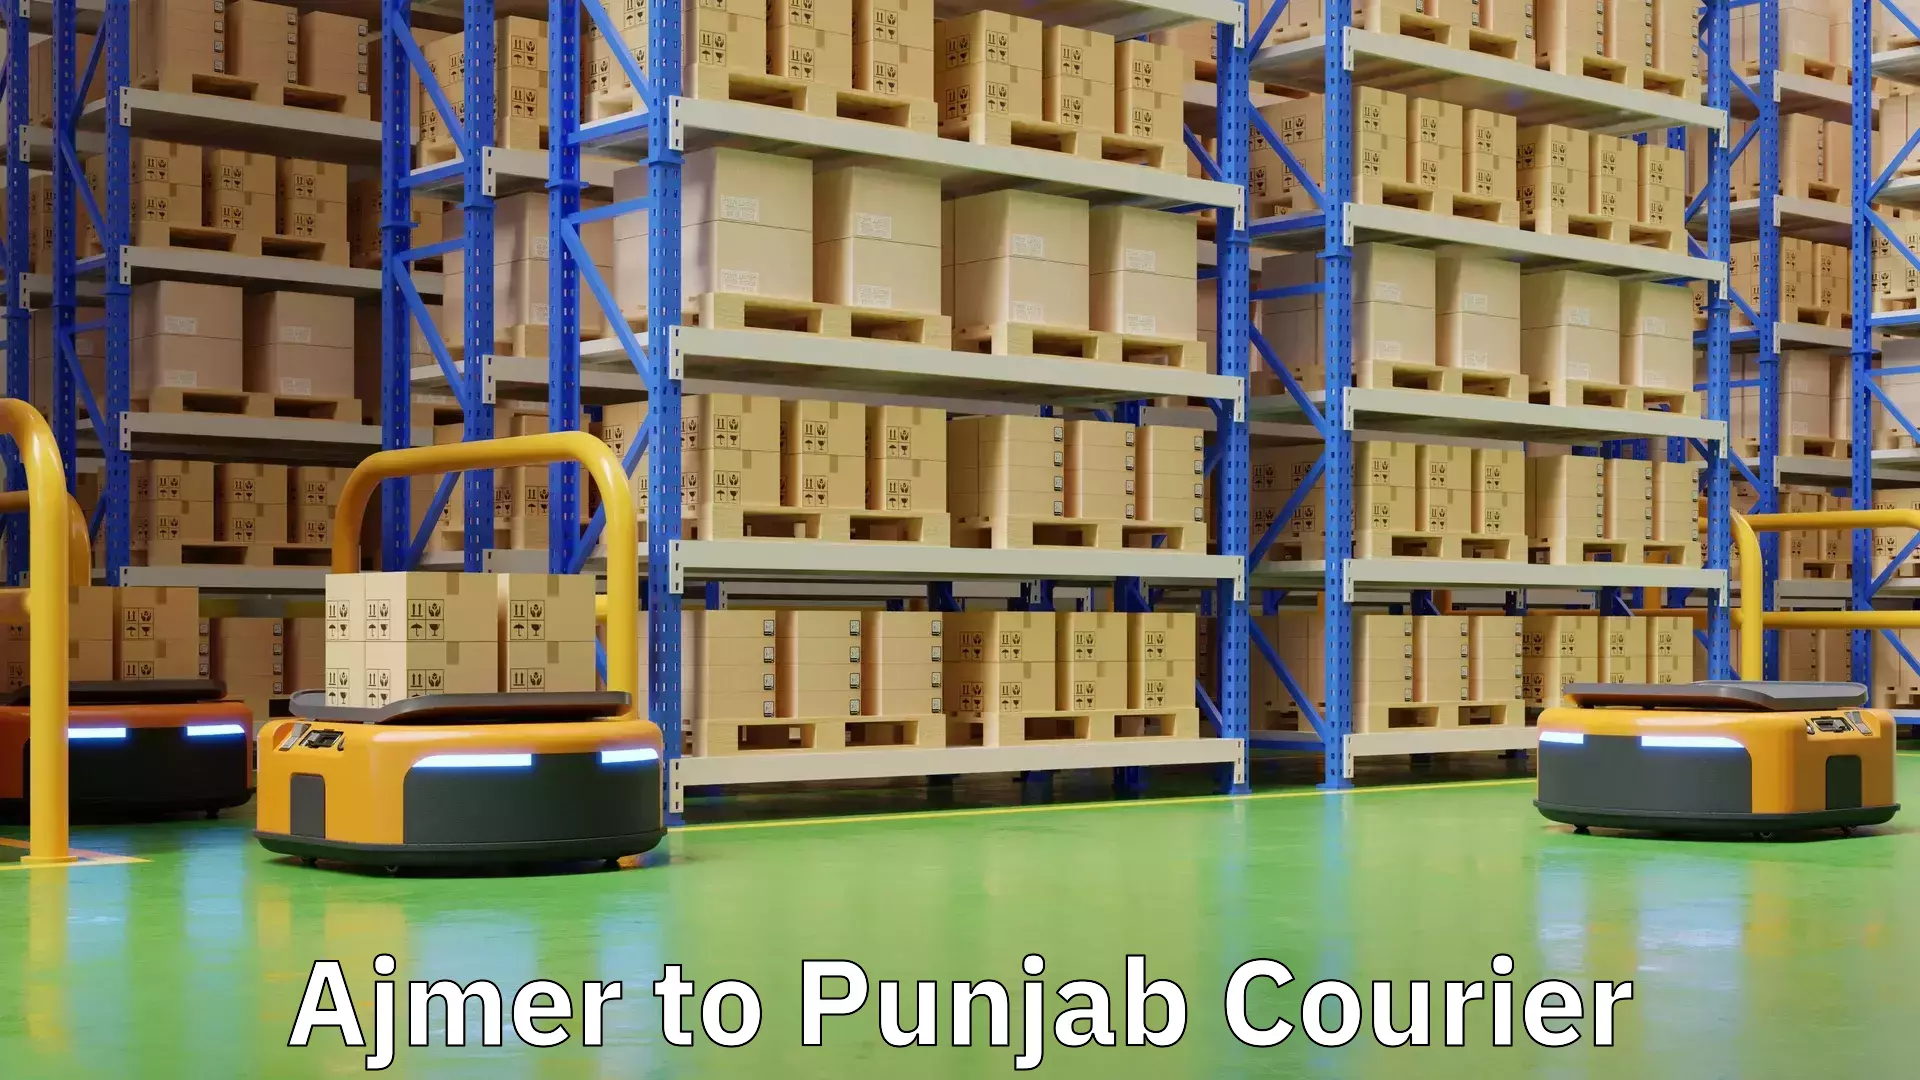 Enhanced tracking features in Ajmer to Punjab